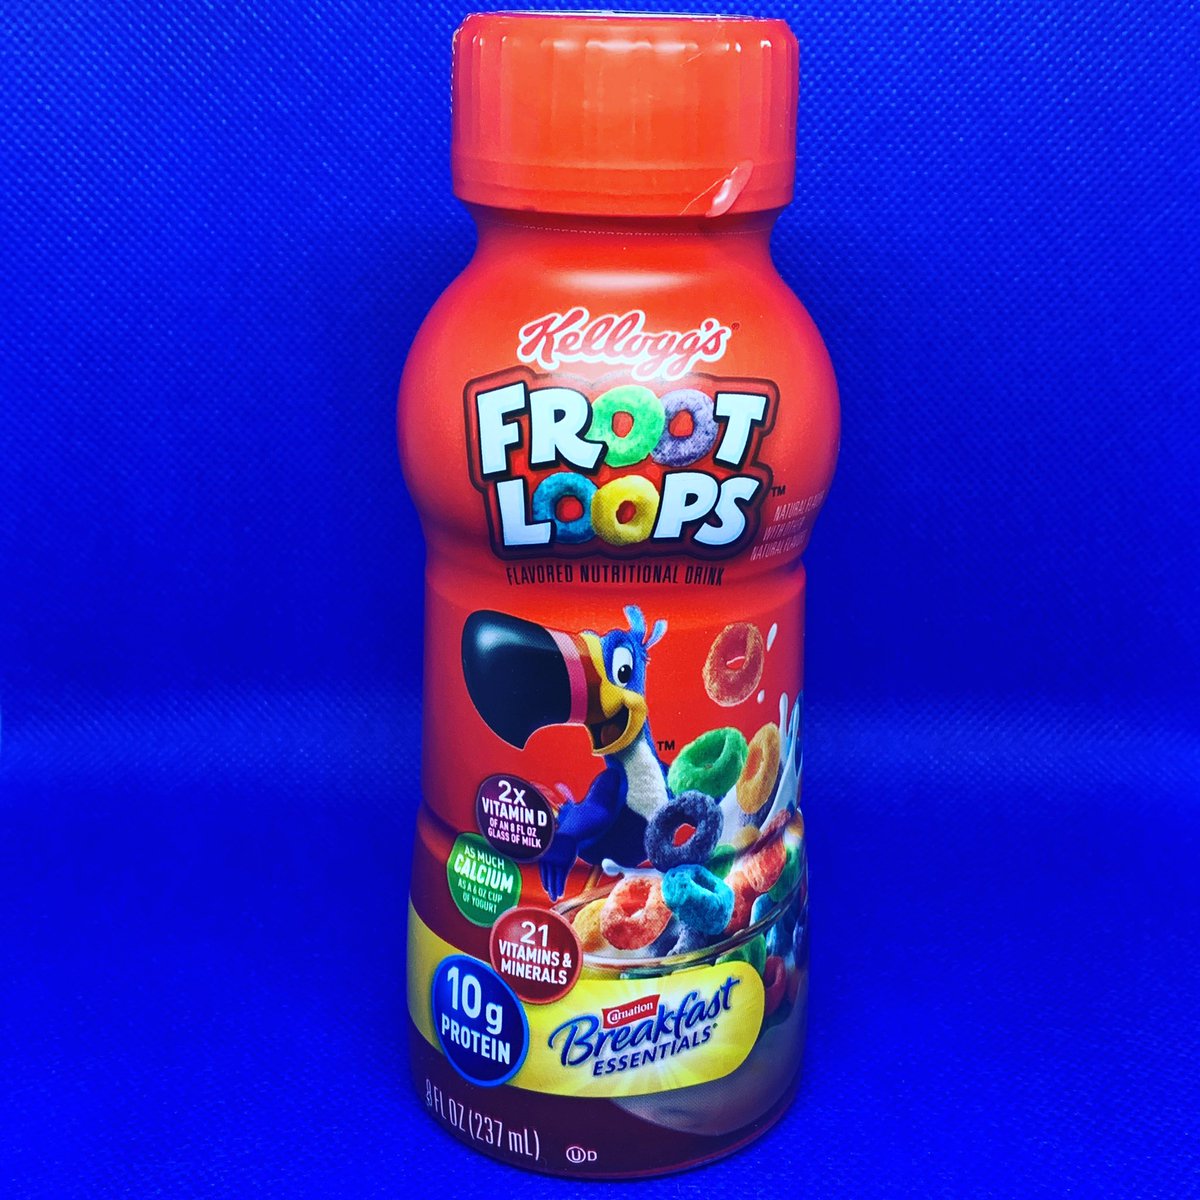 Carnation Breakfast Essentials Kellogg’s Froot Loops flavored Nutritional Drink
<gifted for reviewing purposes > by try it sampling and @carnationbreakfastessentials 

#tryitsampling #bazaarvoice #carnationbreakfastessentials #freeproduct #freebie #trybeforeyoubuy #producttester